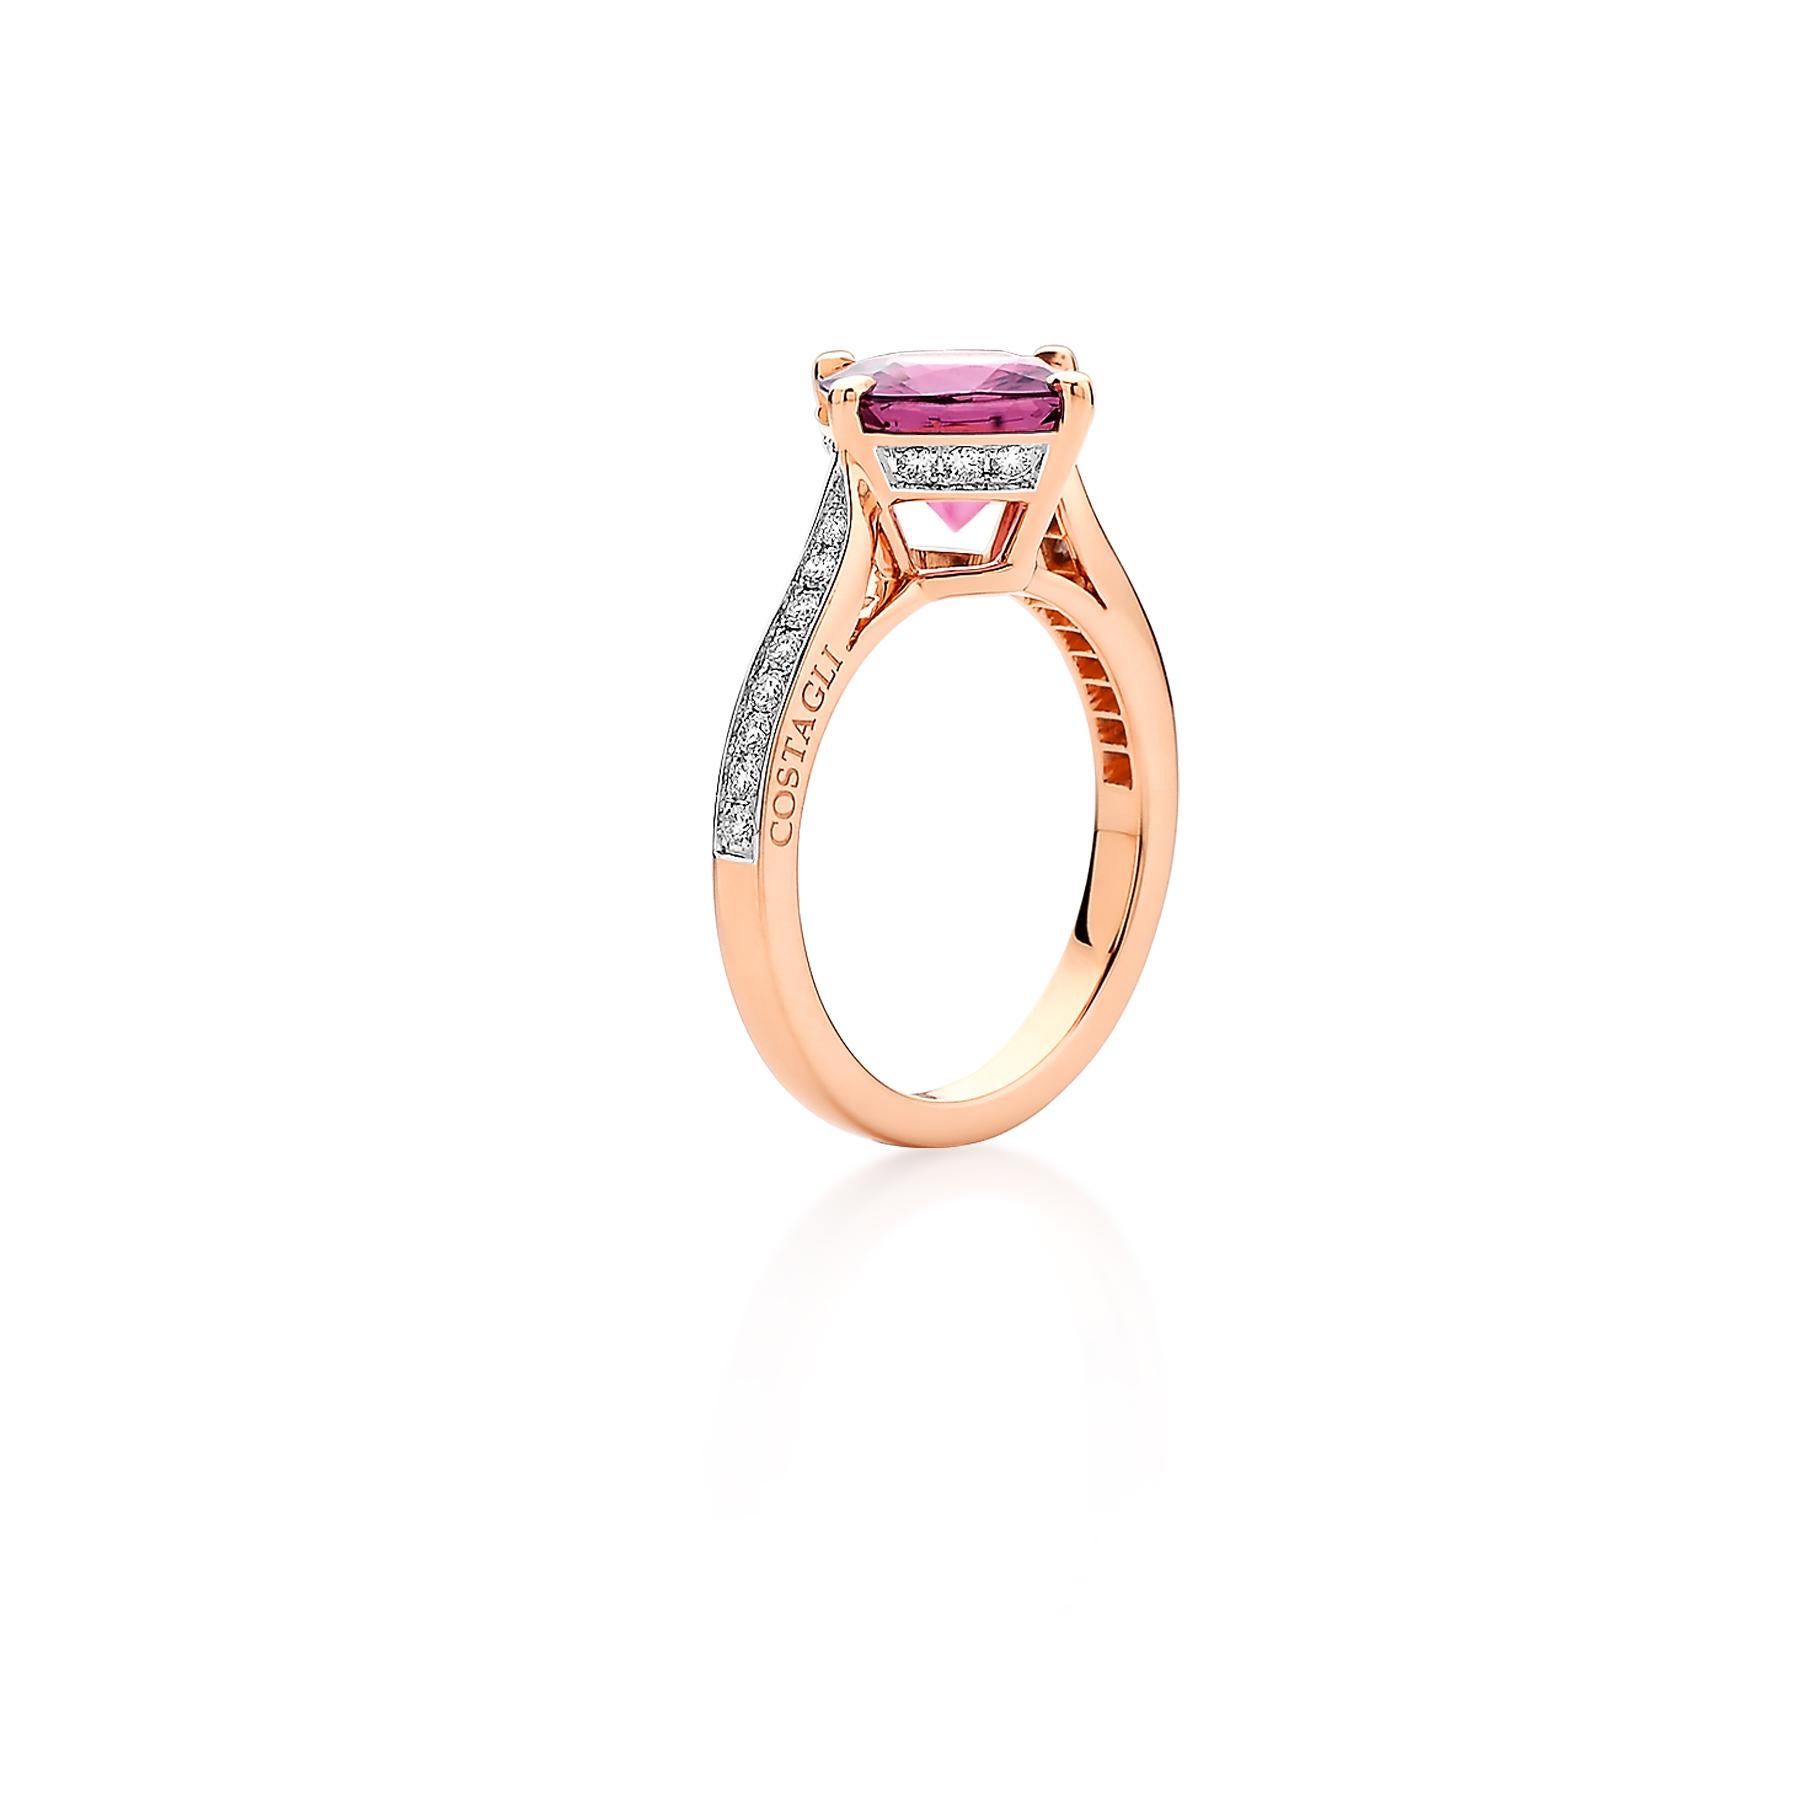 One-of-a-kind cushion shape rhodolite pink garnet ring set in 18kt rose gold with pave-set round, brilliant diamonds.

 

This 18kt rose gold rhodolite pink garnet and diamonds cushion ring features the quintessential characteristics of a Paolo